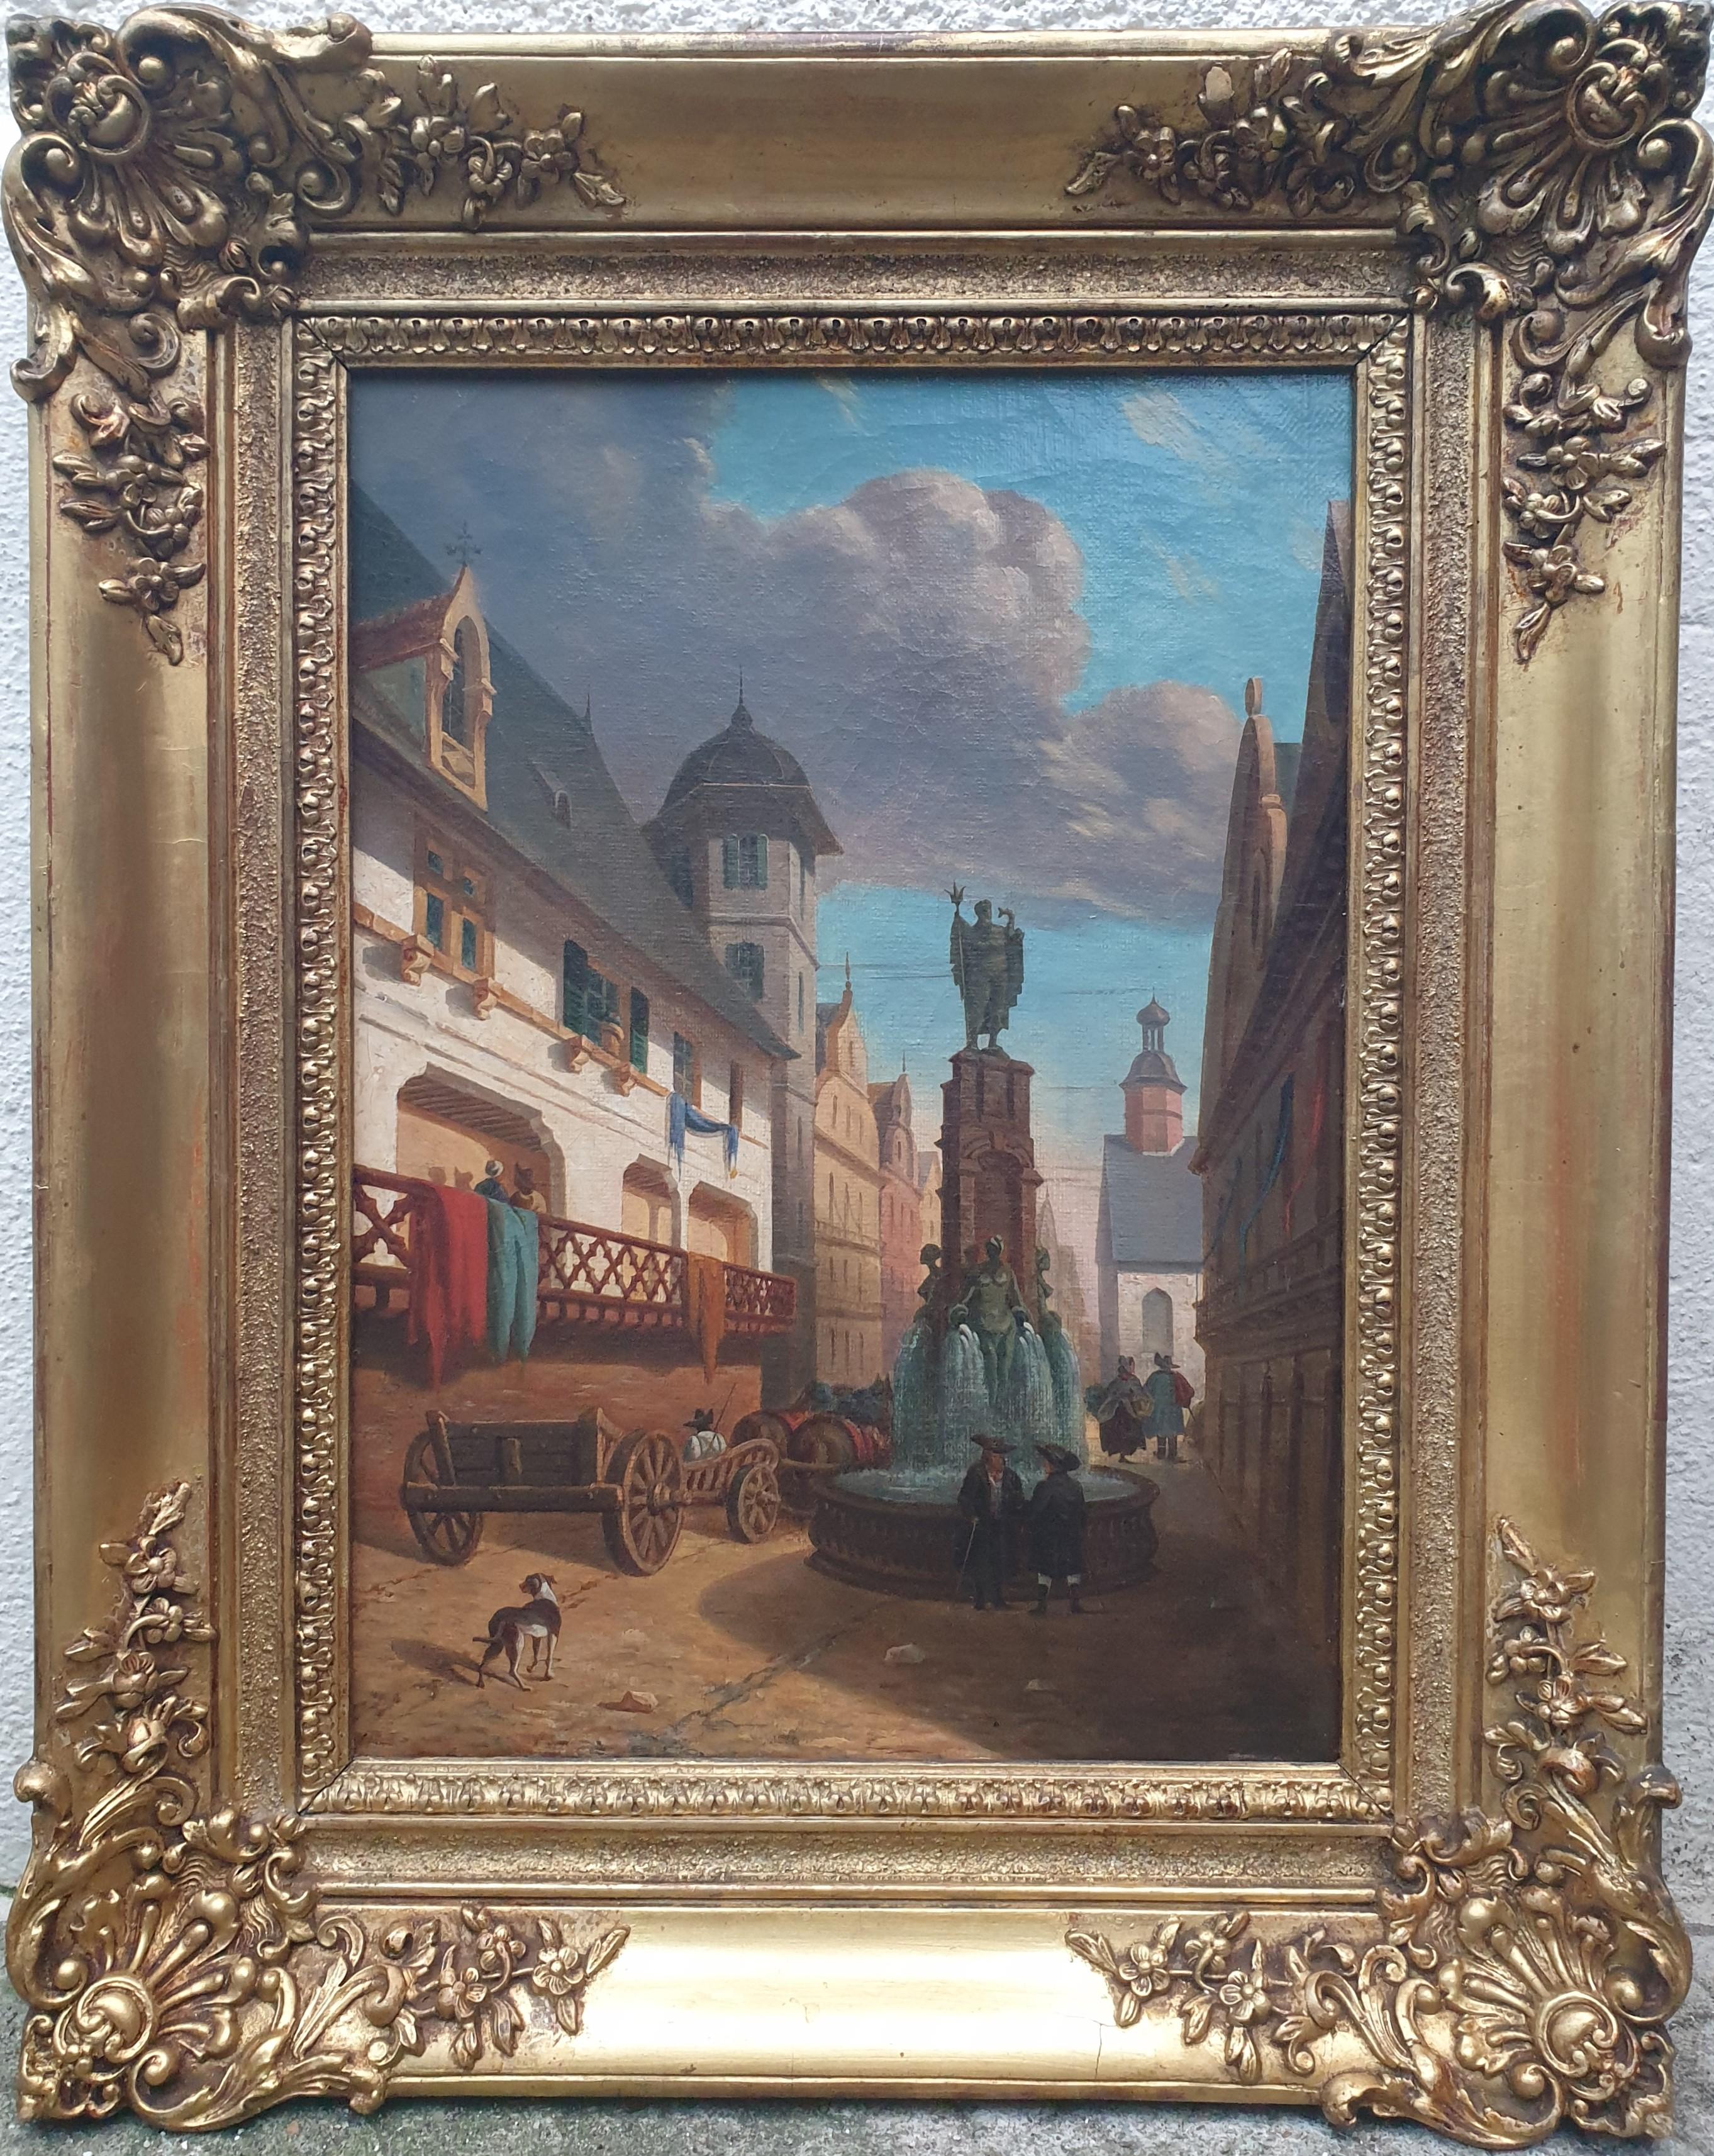 Honoré BARMONT Landscape Painting - Salon Painting pittoresque French Romantic BARMONT mid 19th view town Germany